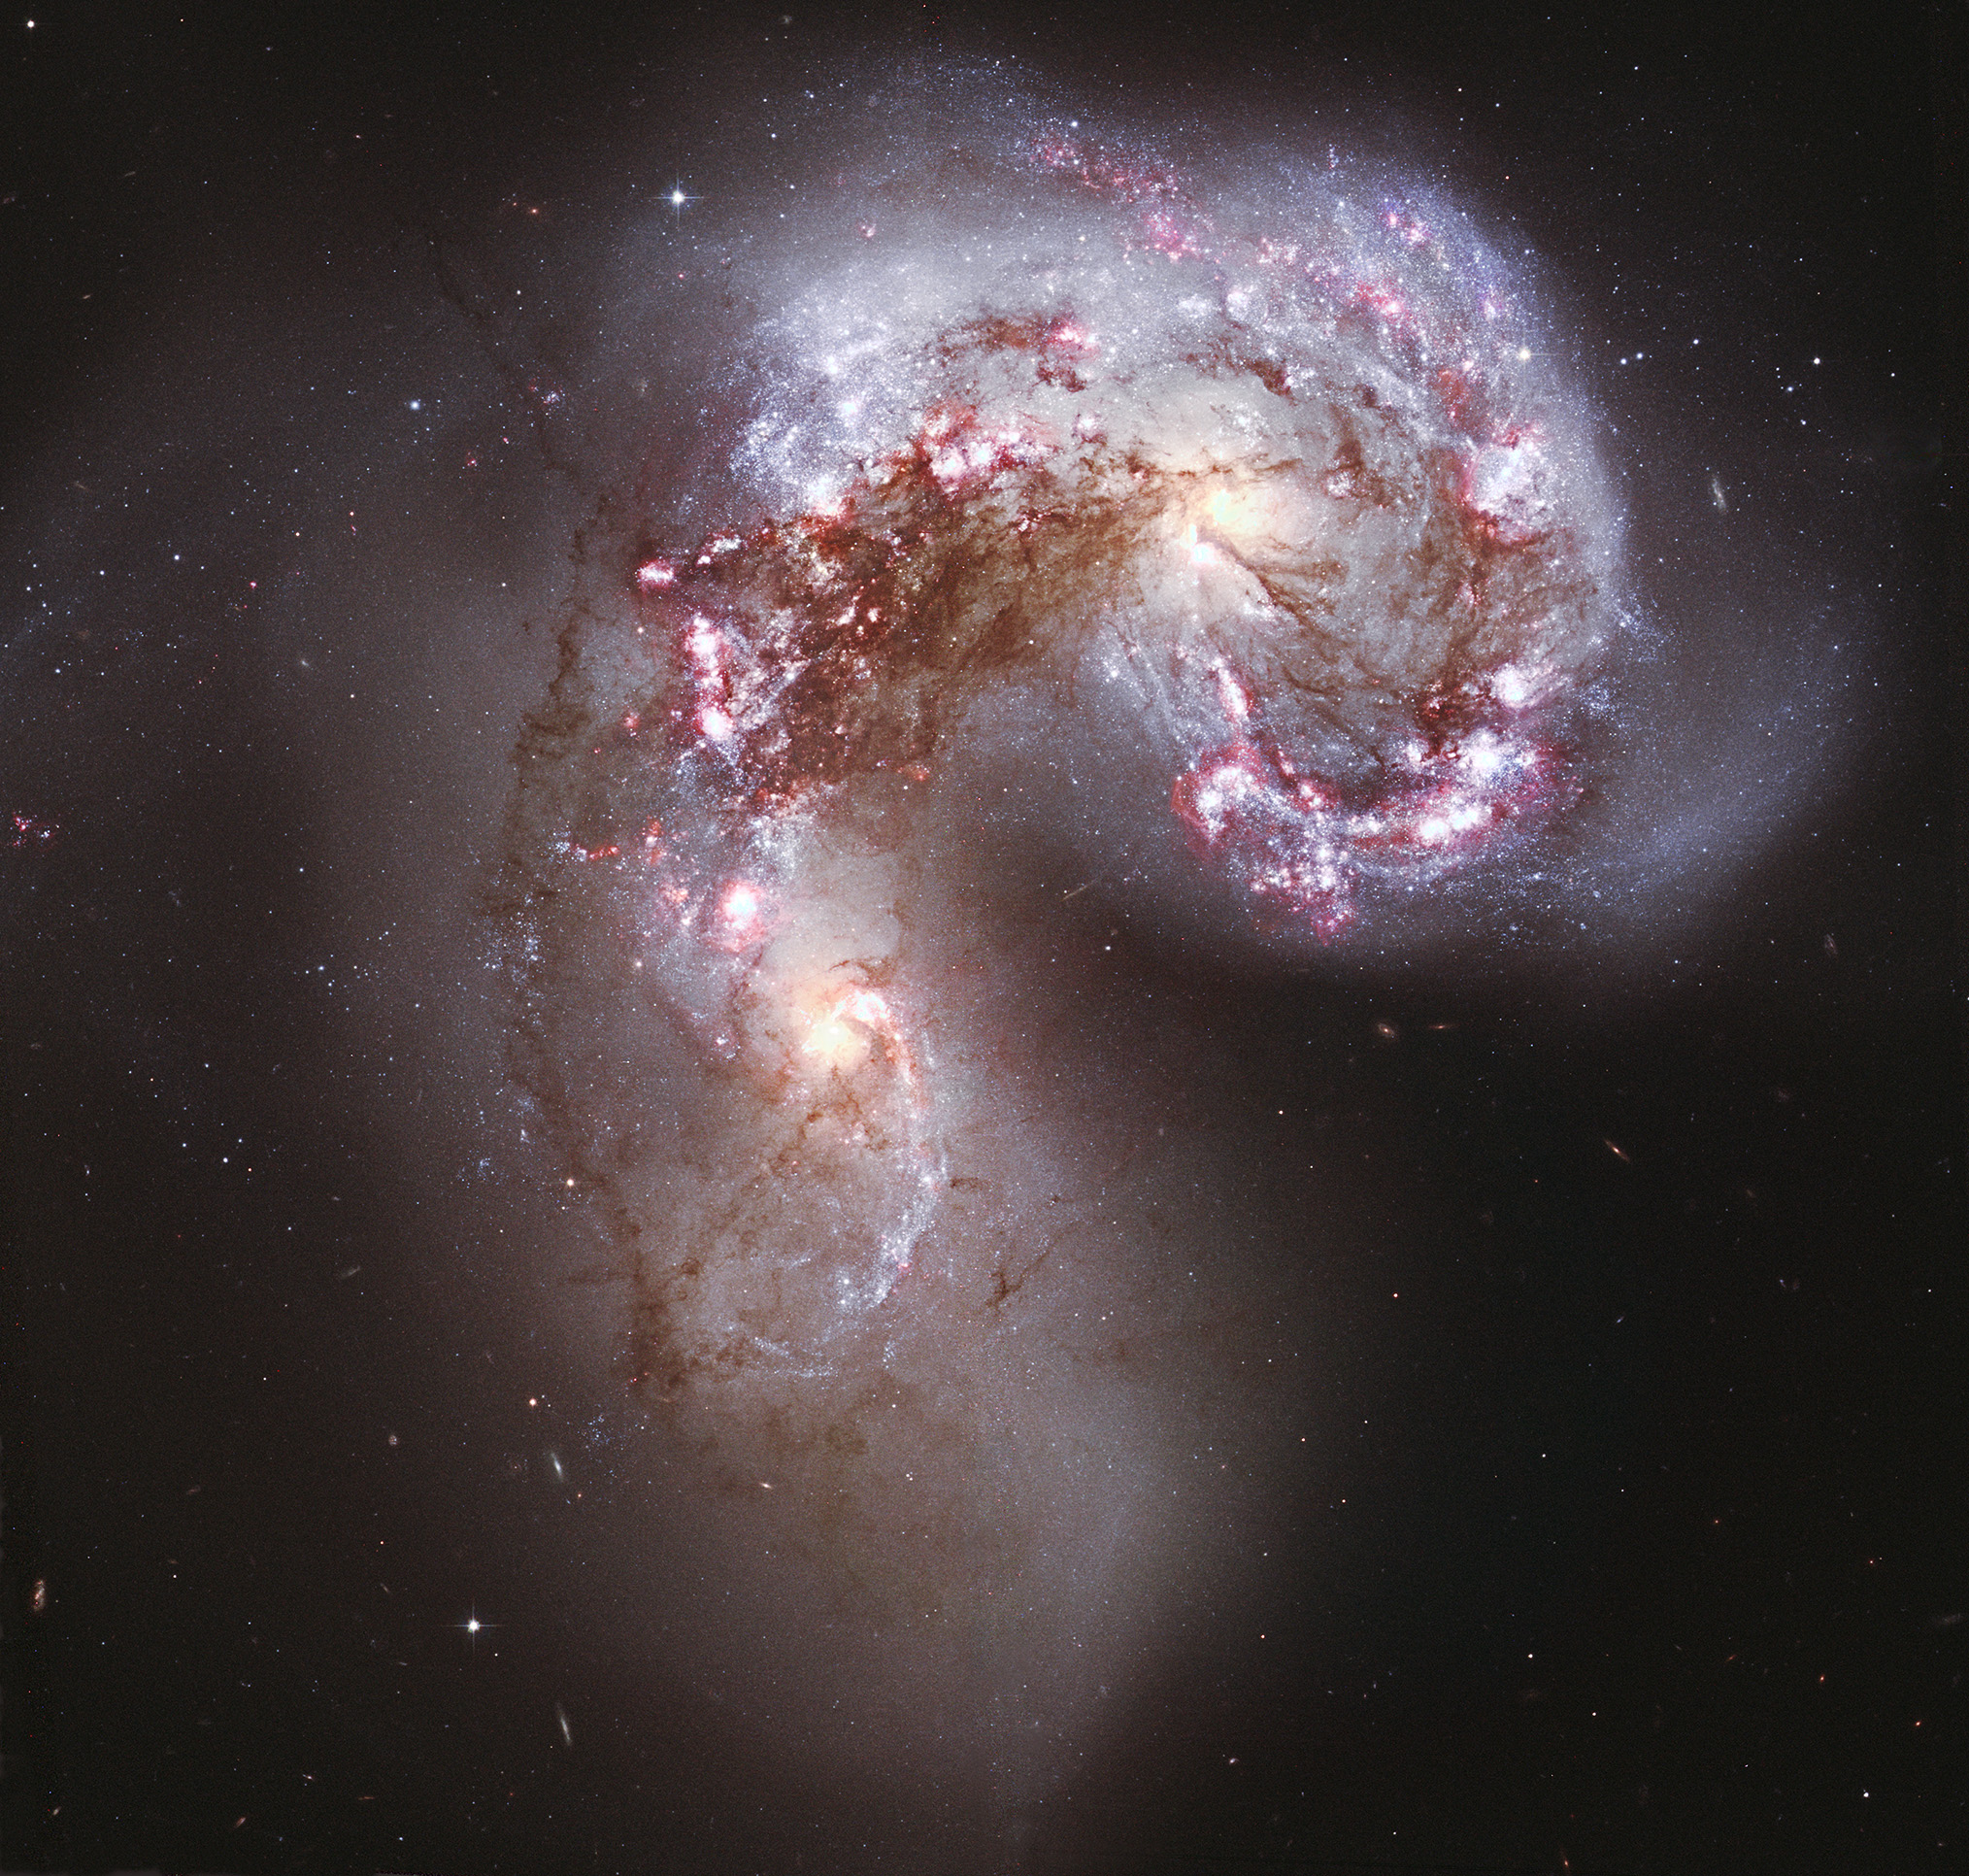 NGC 4038 and NGC 4039 The Antennae Galaxies - Hubble Legacy Archive